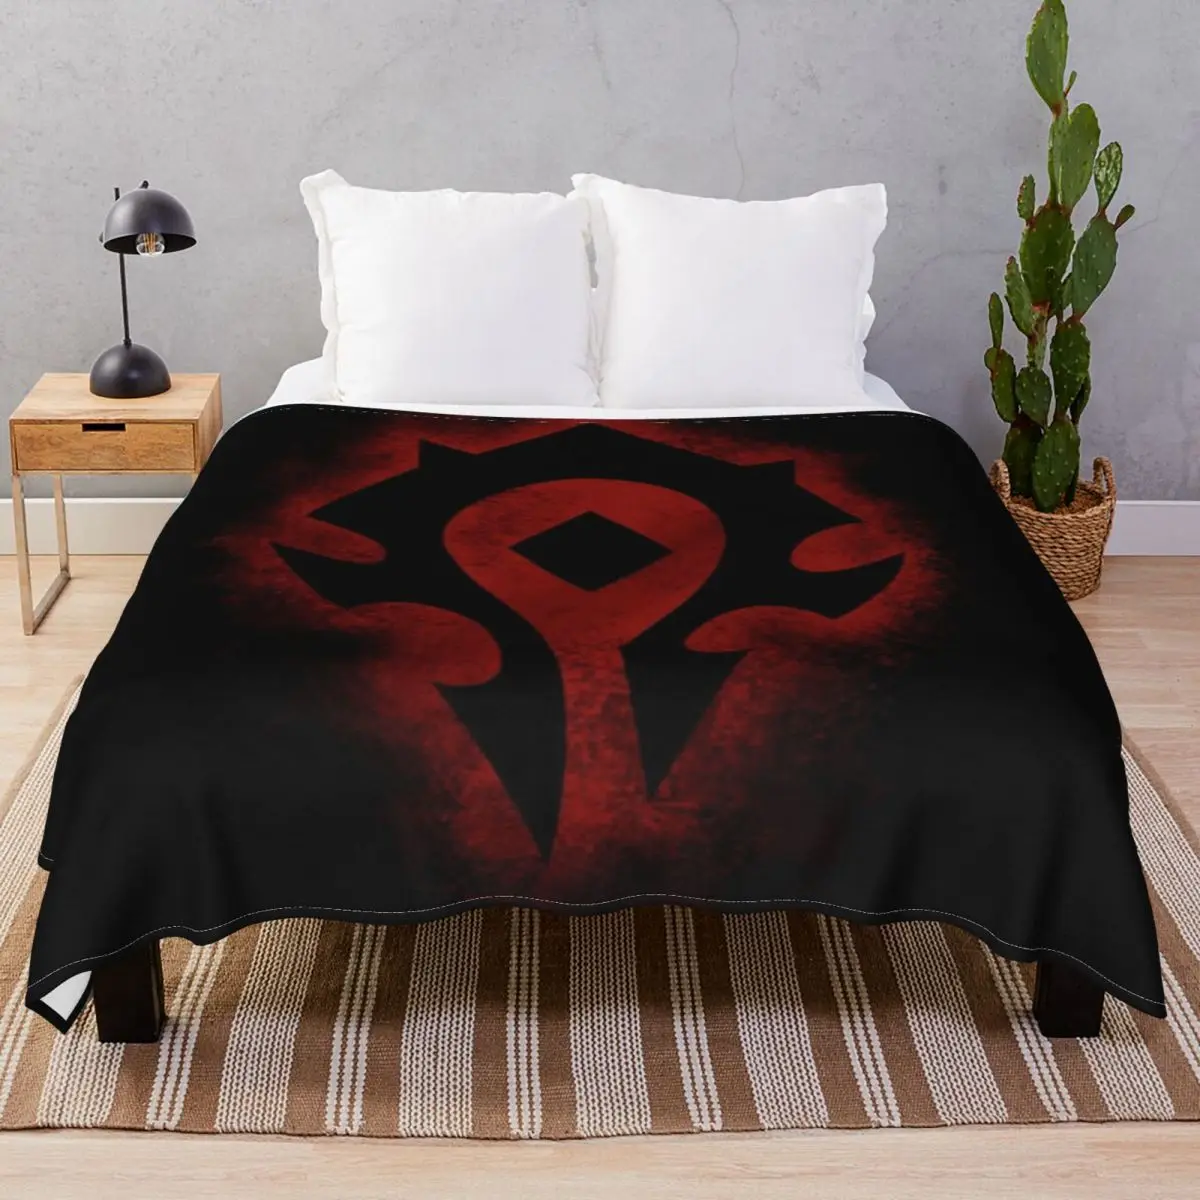 Red Horde Logo Blanket Fleece Autumn Super Warm Unisex Throw Blankets for Bed Home Couch Travel Office